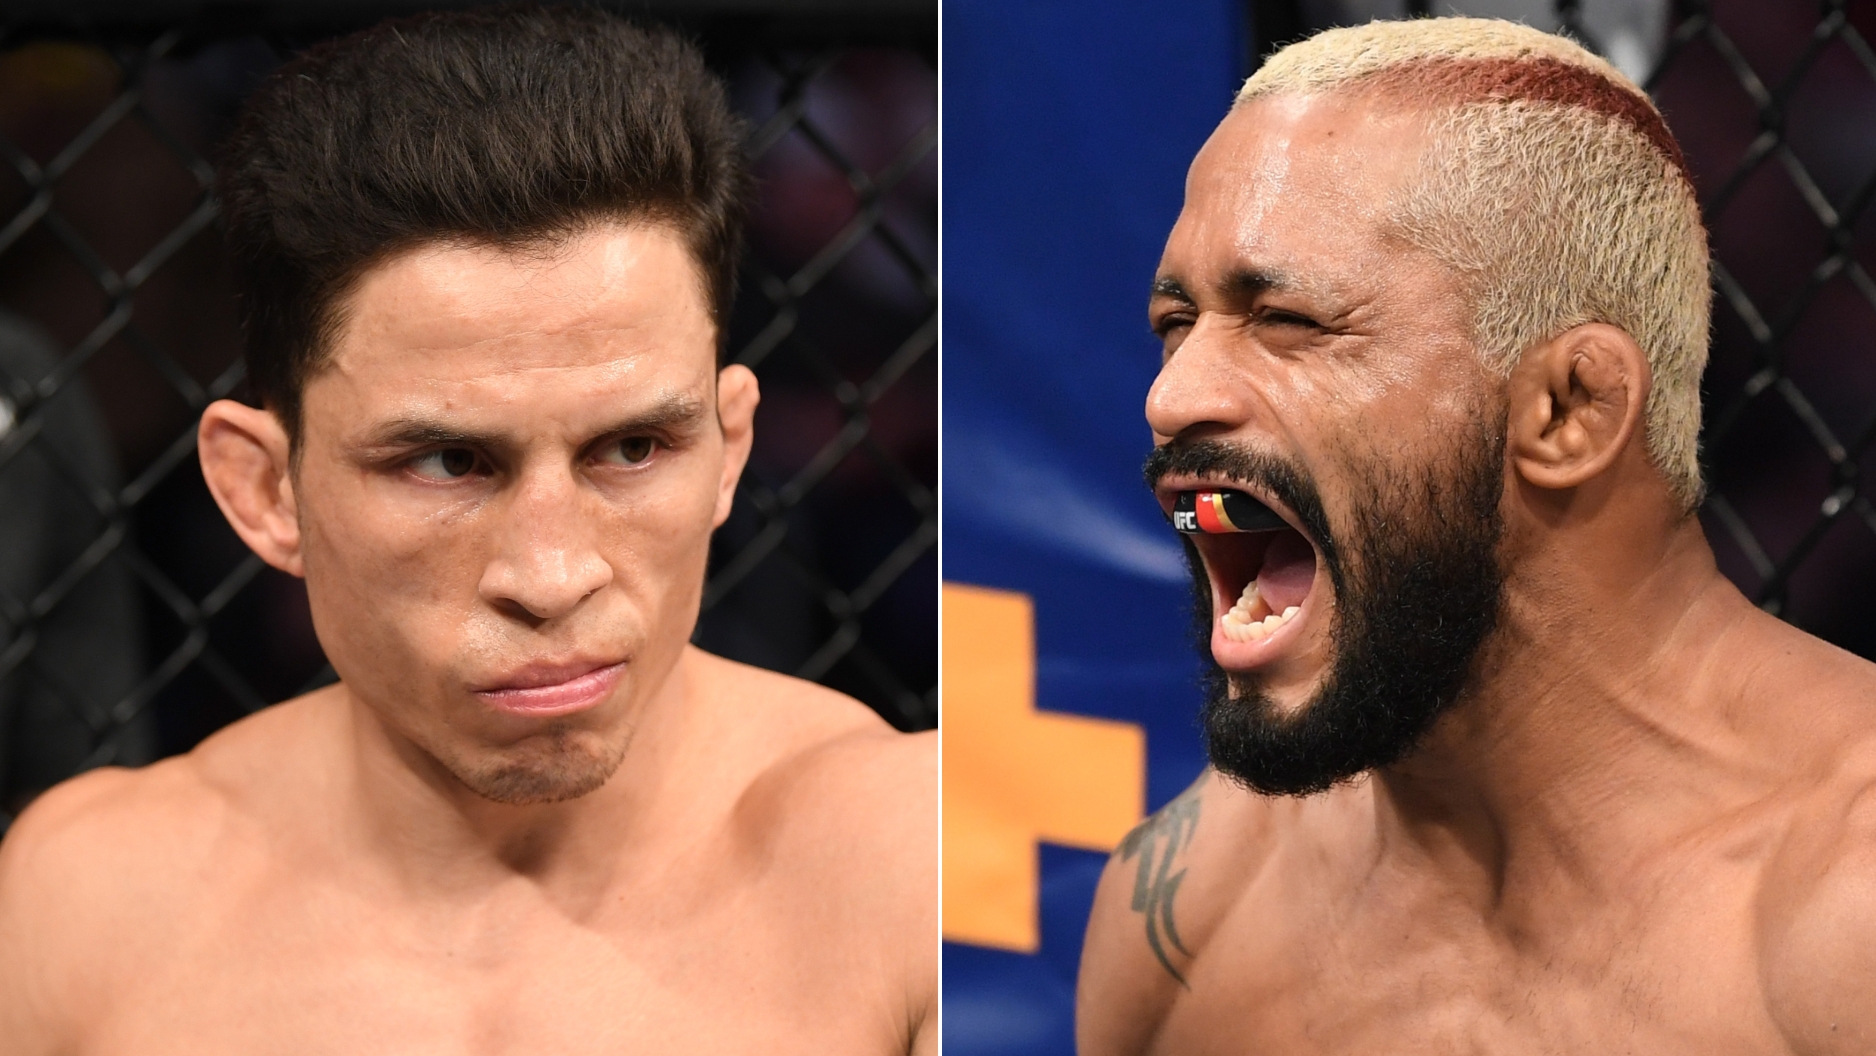 Figueiredo and Benavidez confident ahead of rematch - Stream the Video